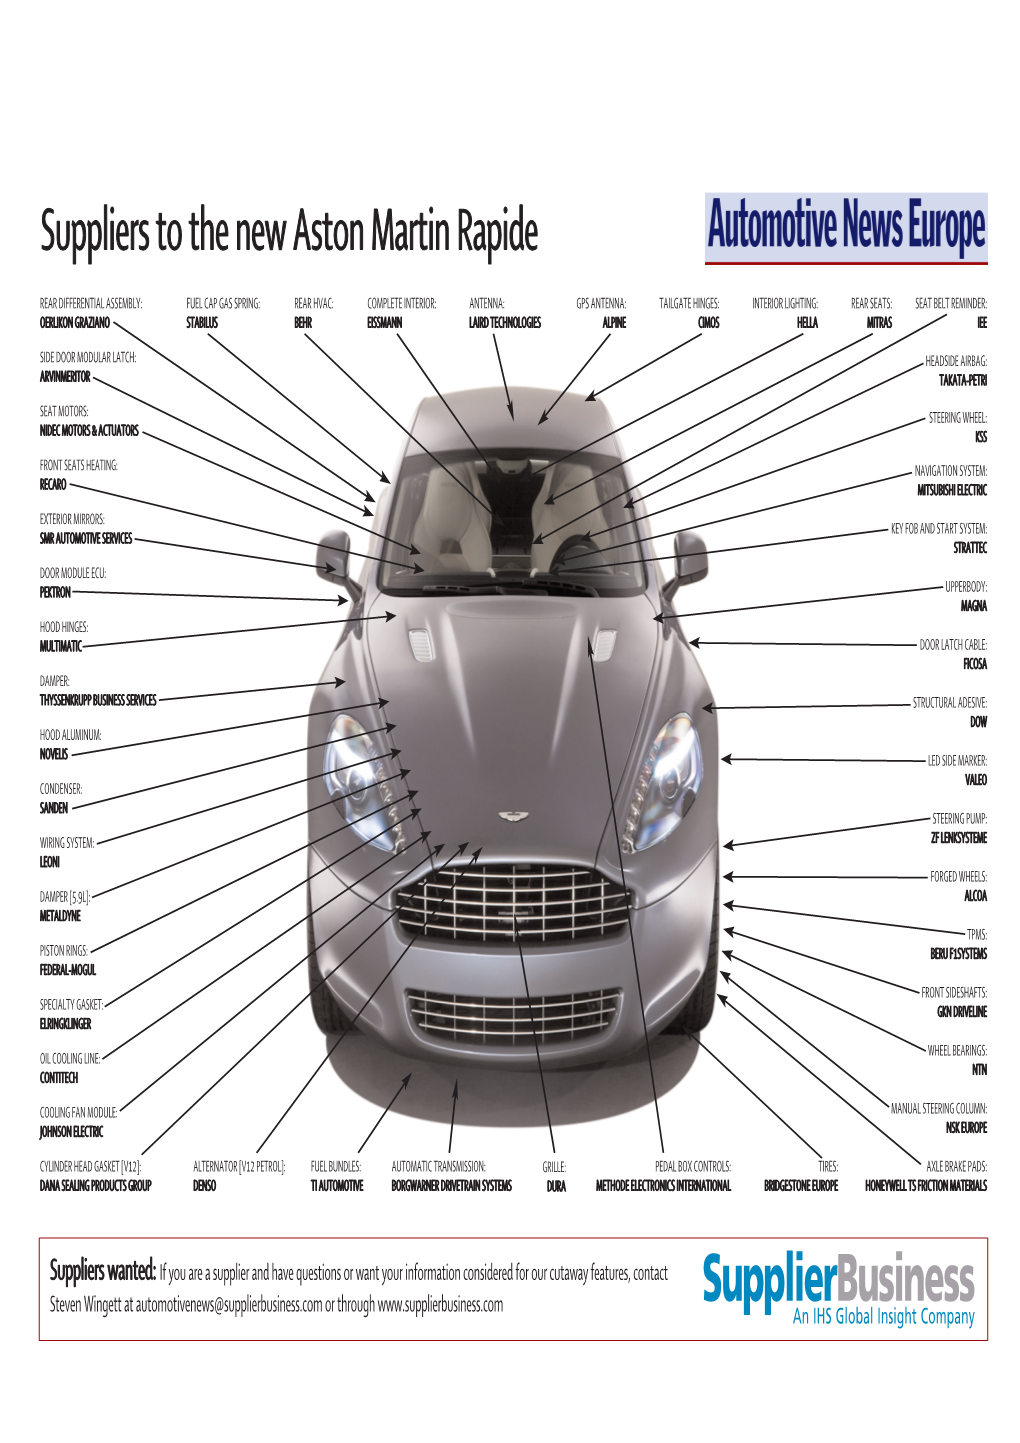 Suppliers to the New Aston Martin Rapide